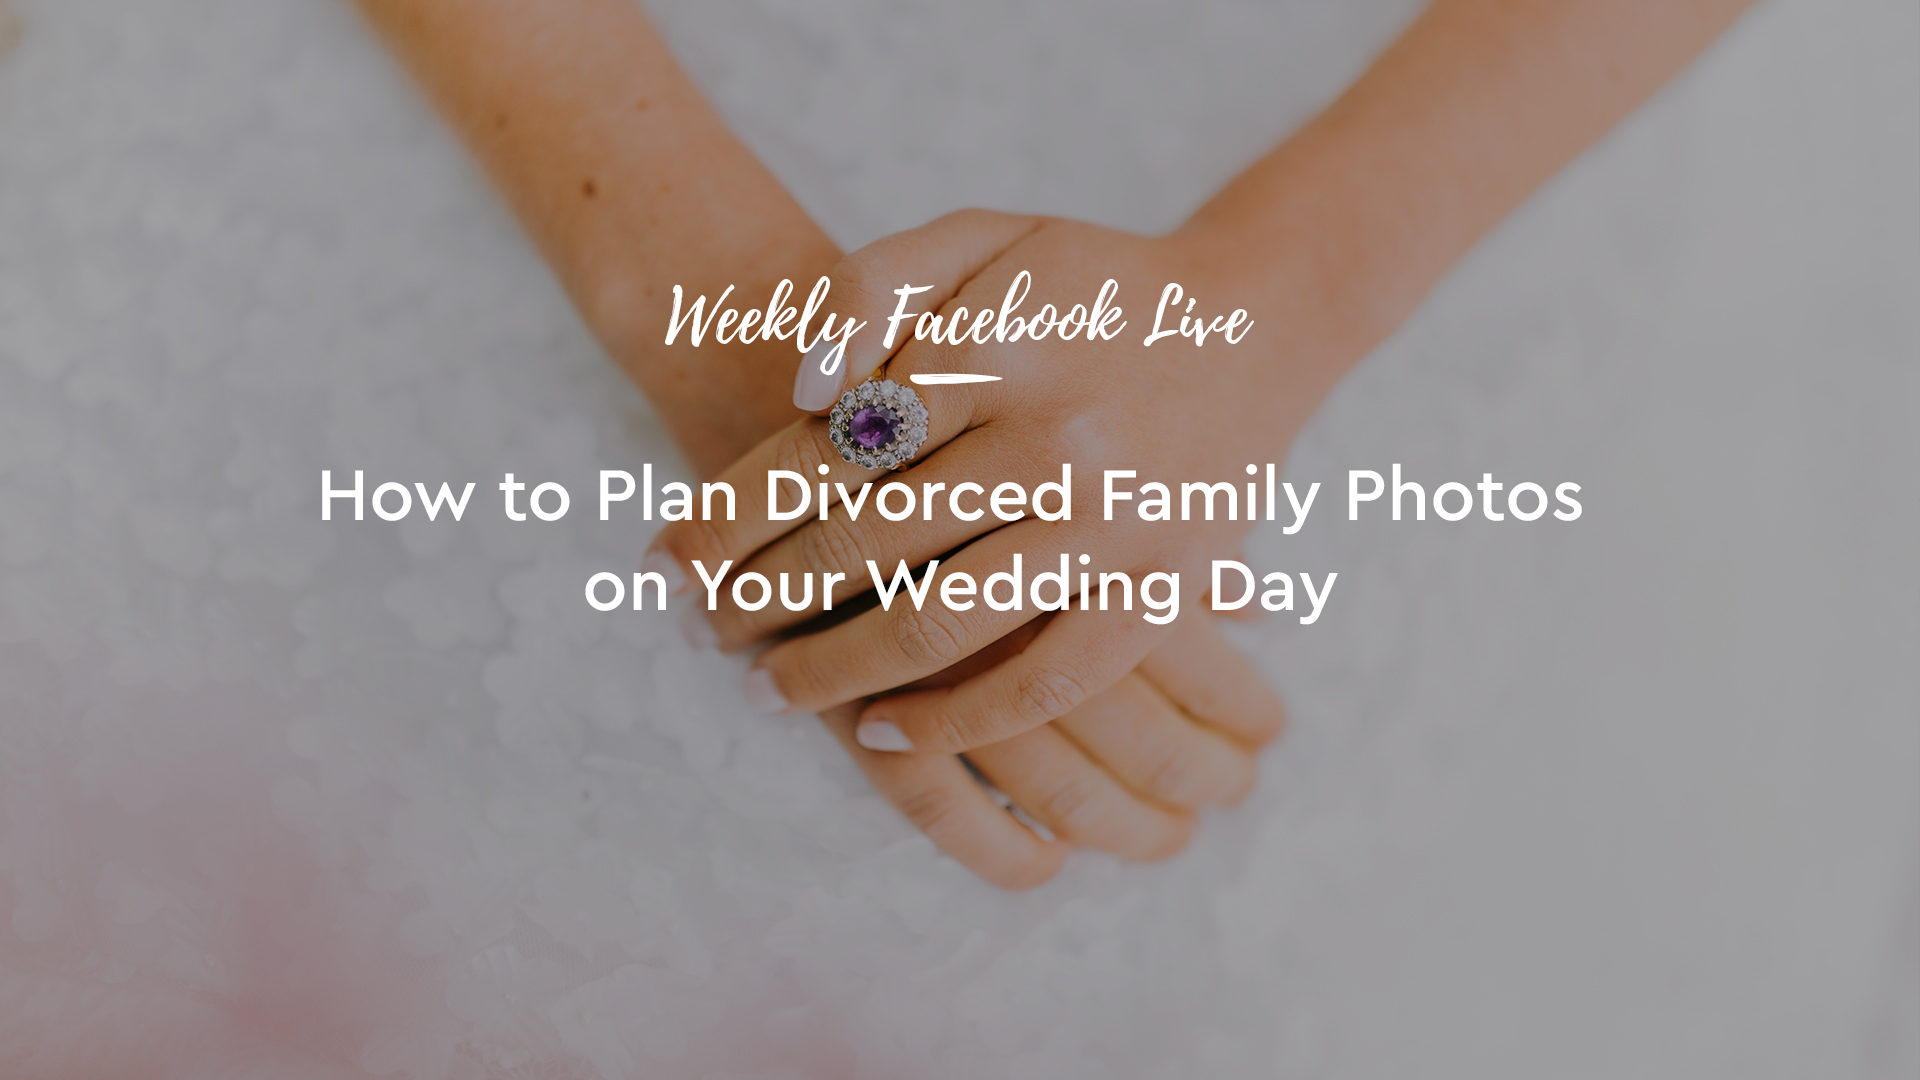 00-How-to-Plan-Divorced-Family-Photos-1920x1080 How to Plan Divorced Family Photos on Your Wedding Day How-to Wedding 